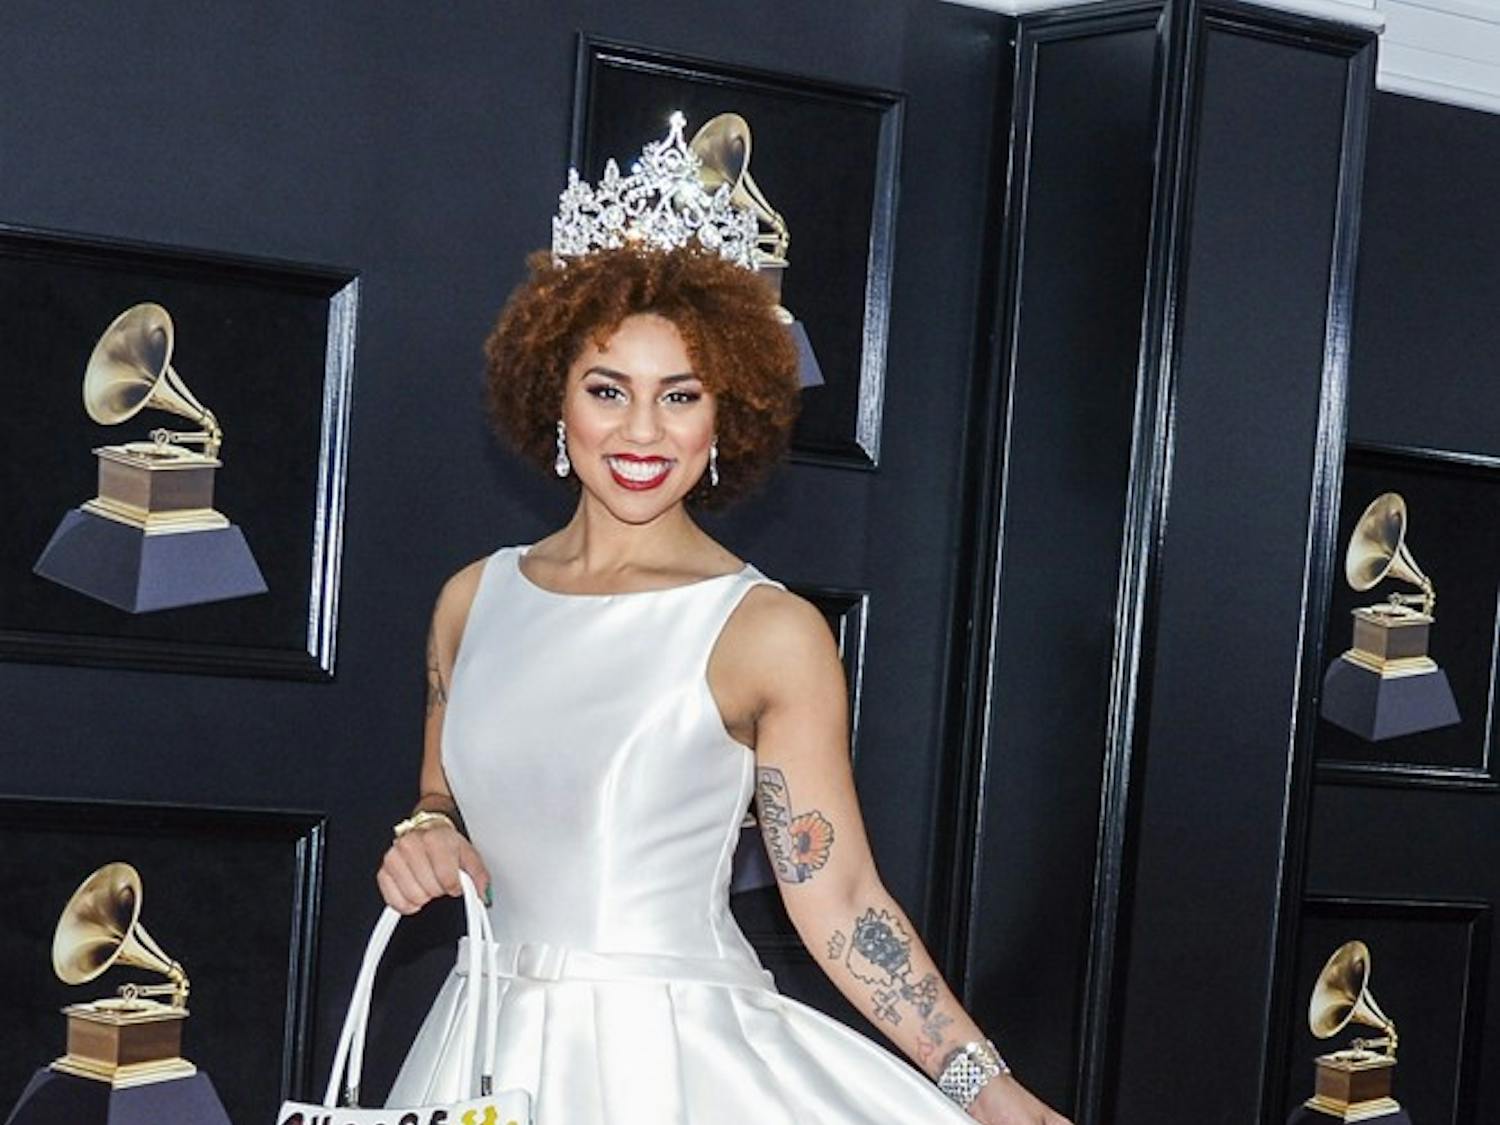 Joy Villa arrives at the 60th Annual Grammy Awards red carpet on Sunday, January 28, 2018 at Madison Square Garden in New York City, N.Y. (Anthony Behar/Sipa USA/TNS)